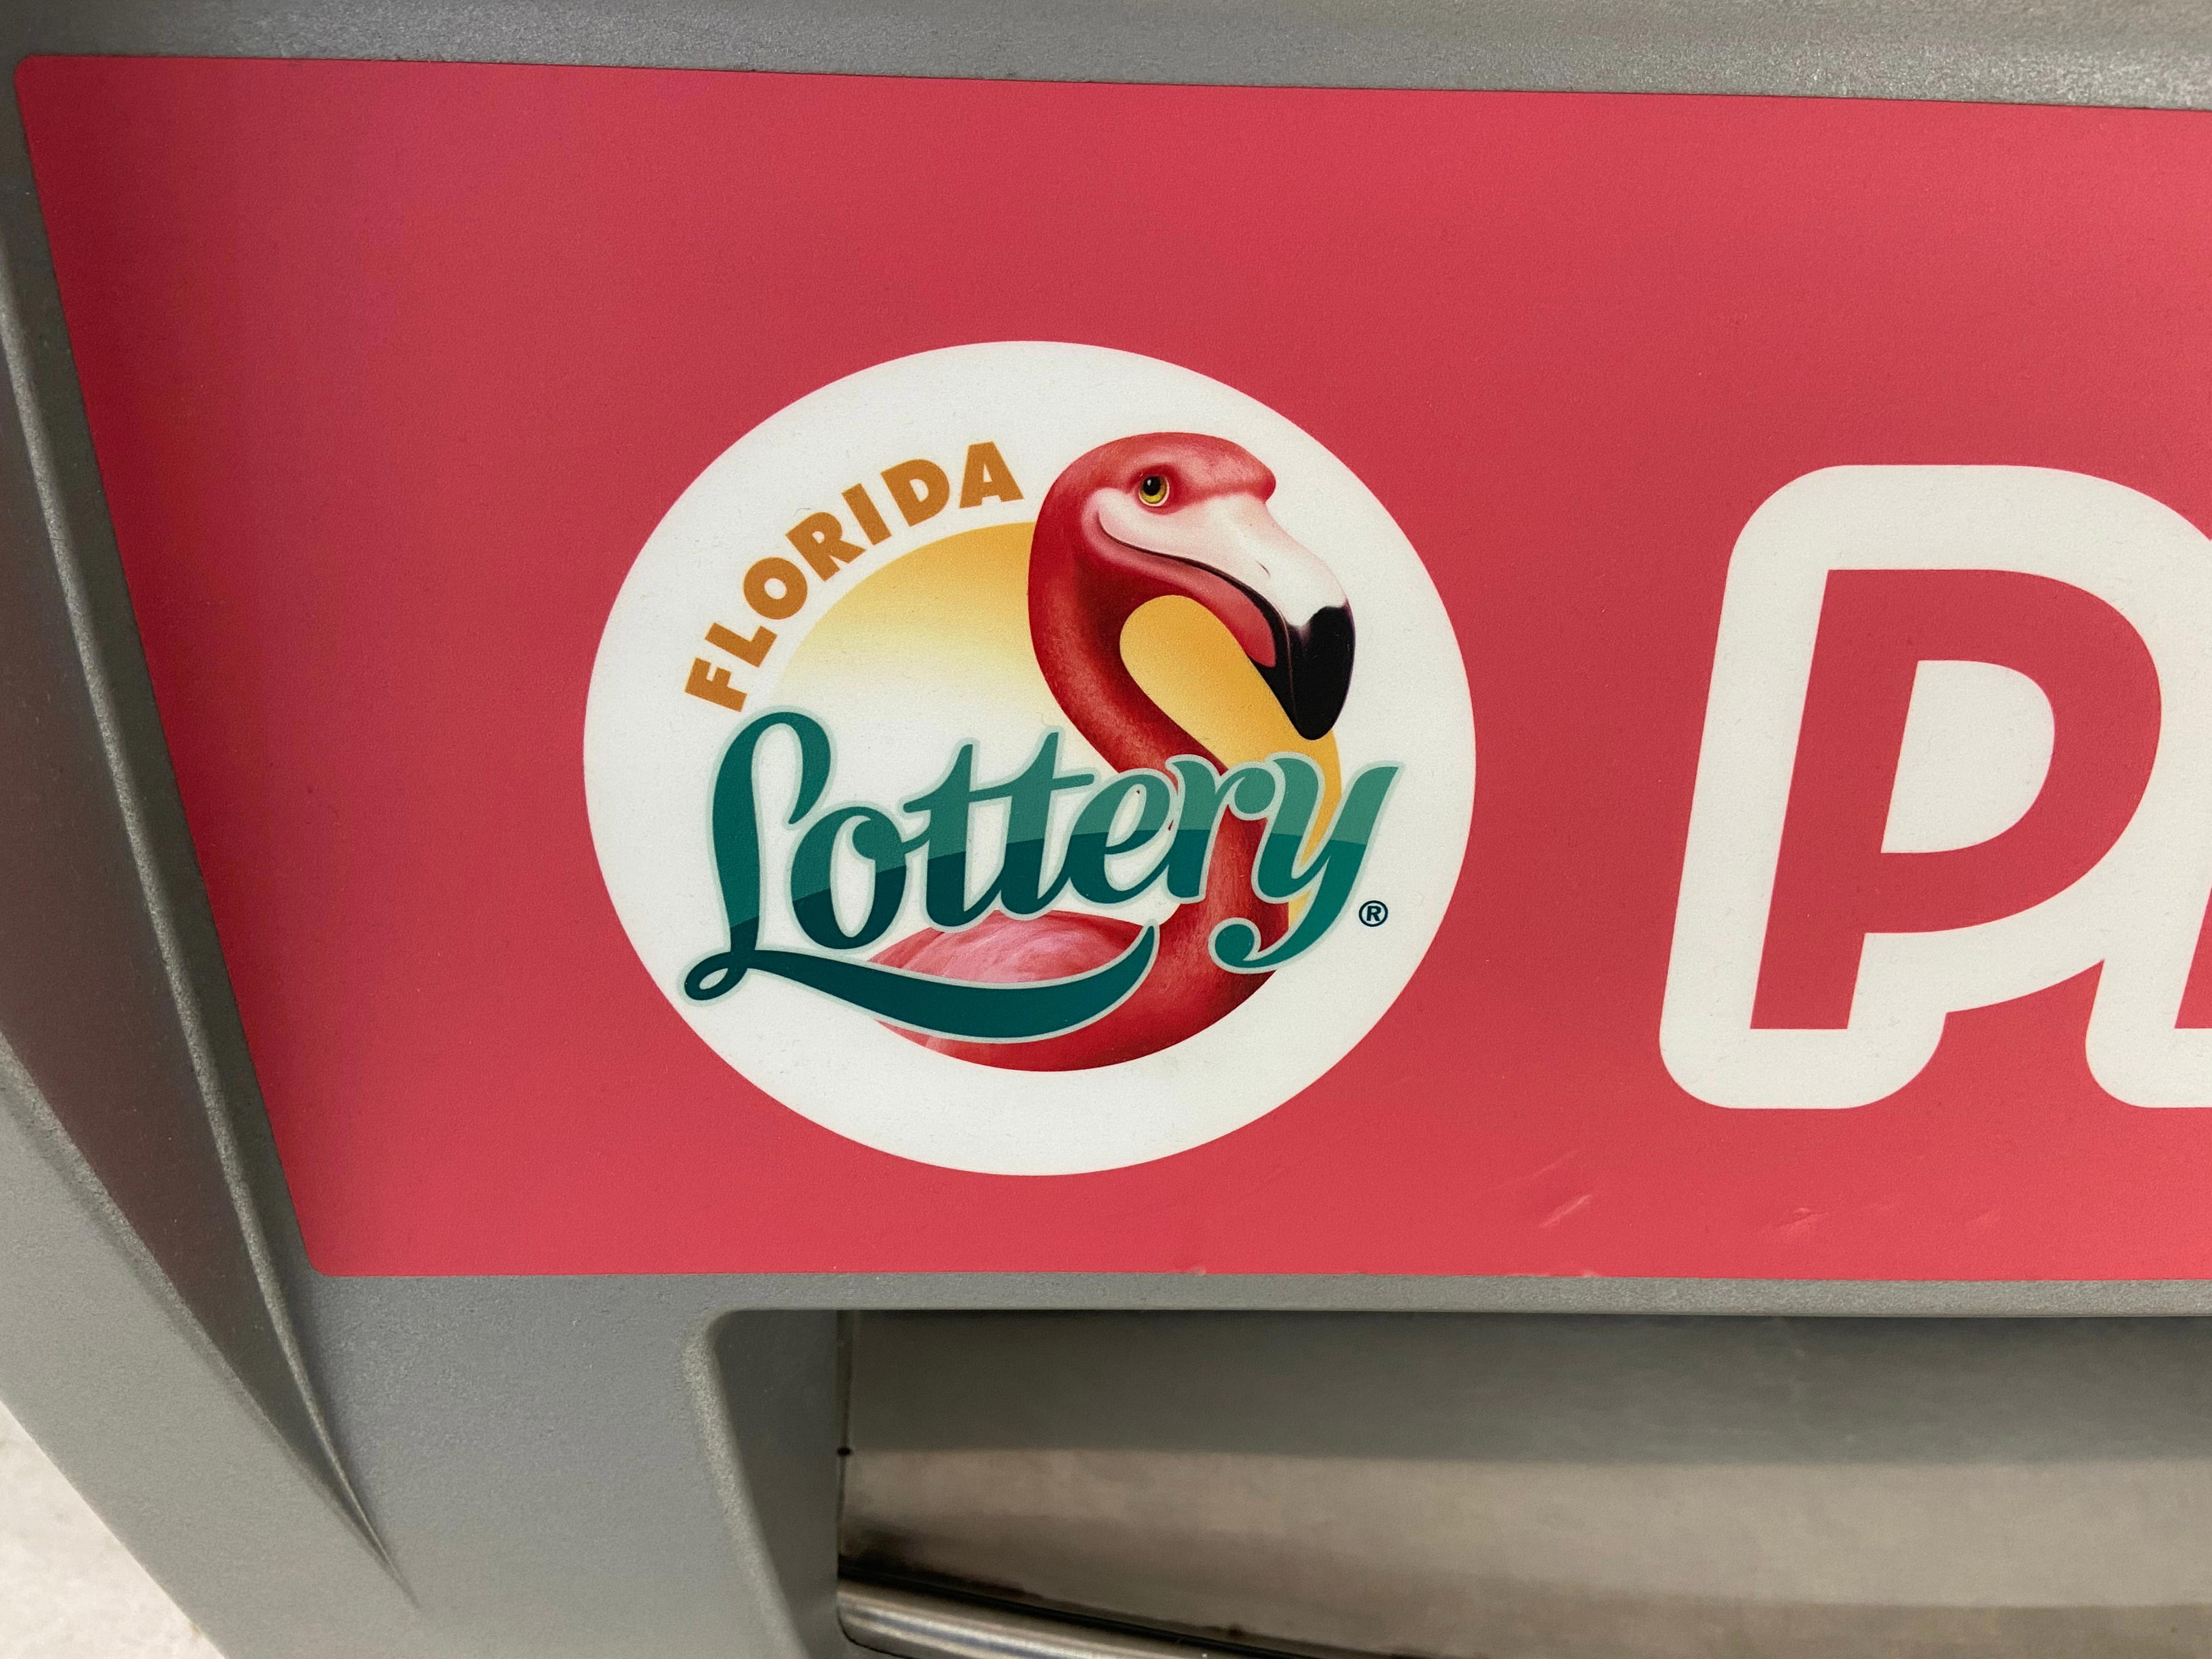 Florida Lottery numbers from July 9 drawing. Fantasy 5 drawings both